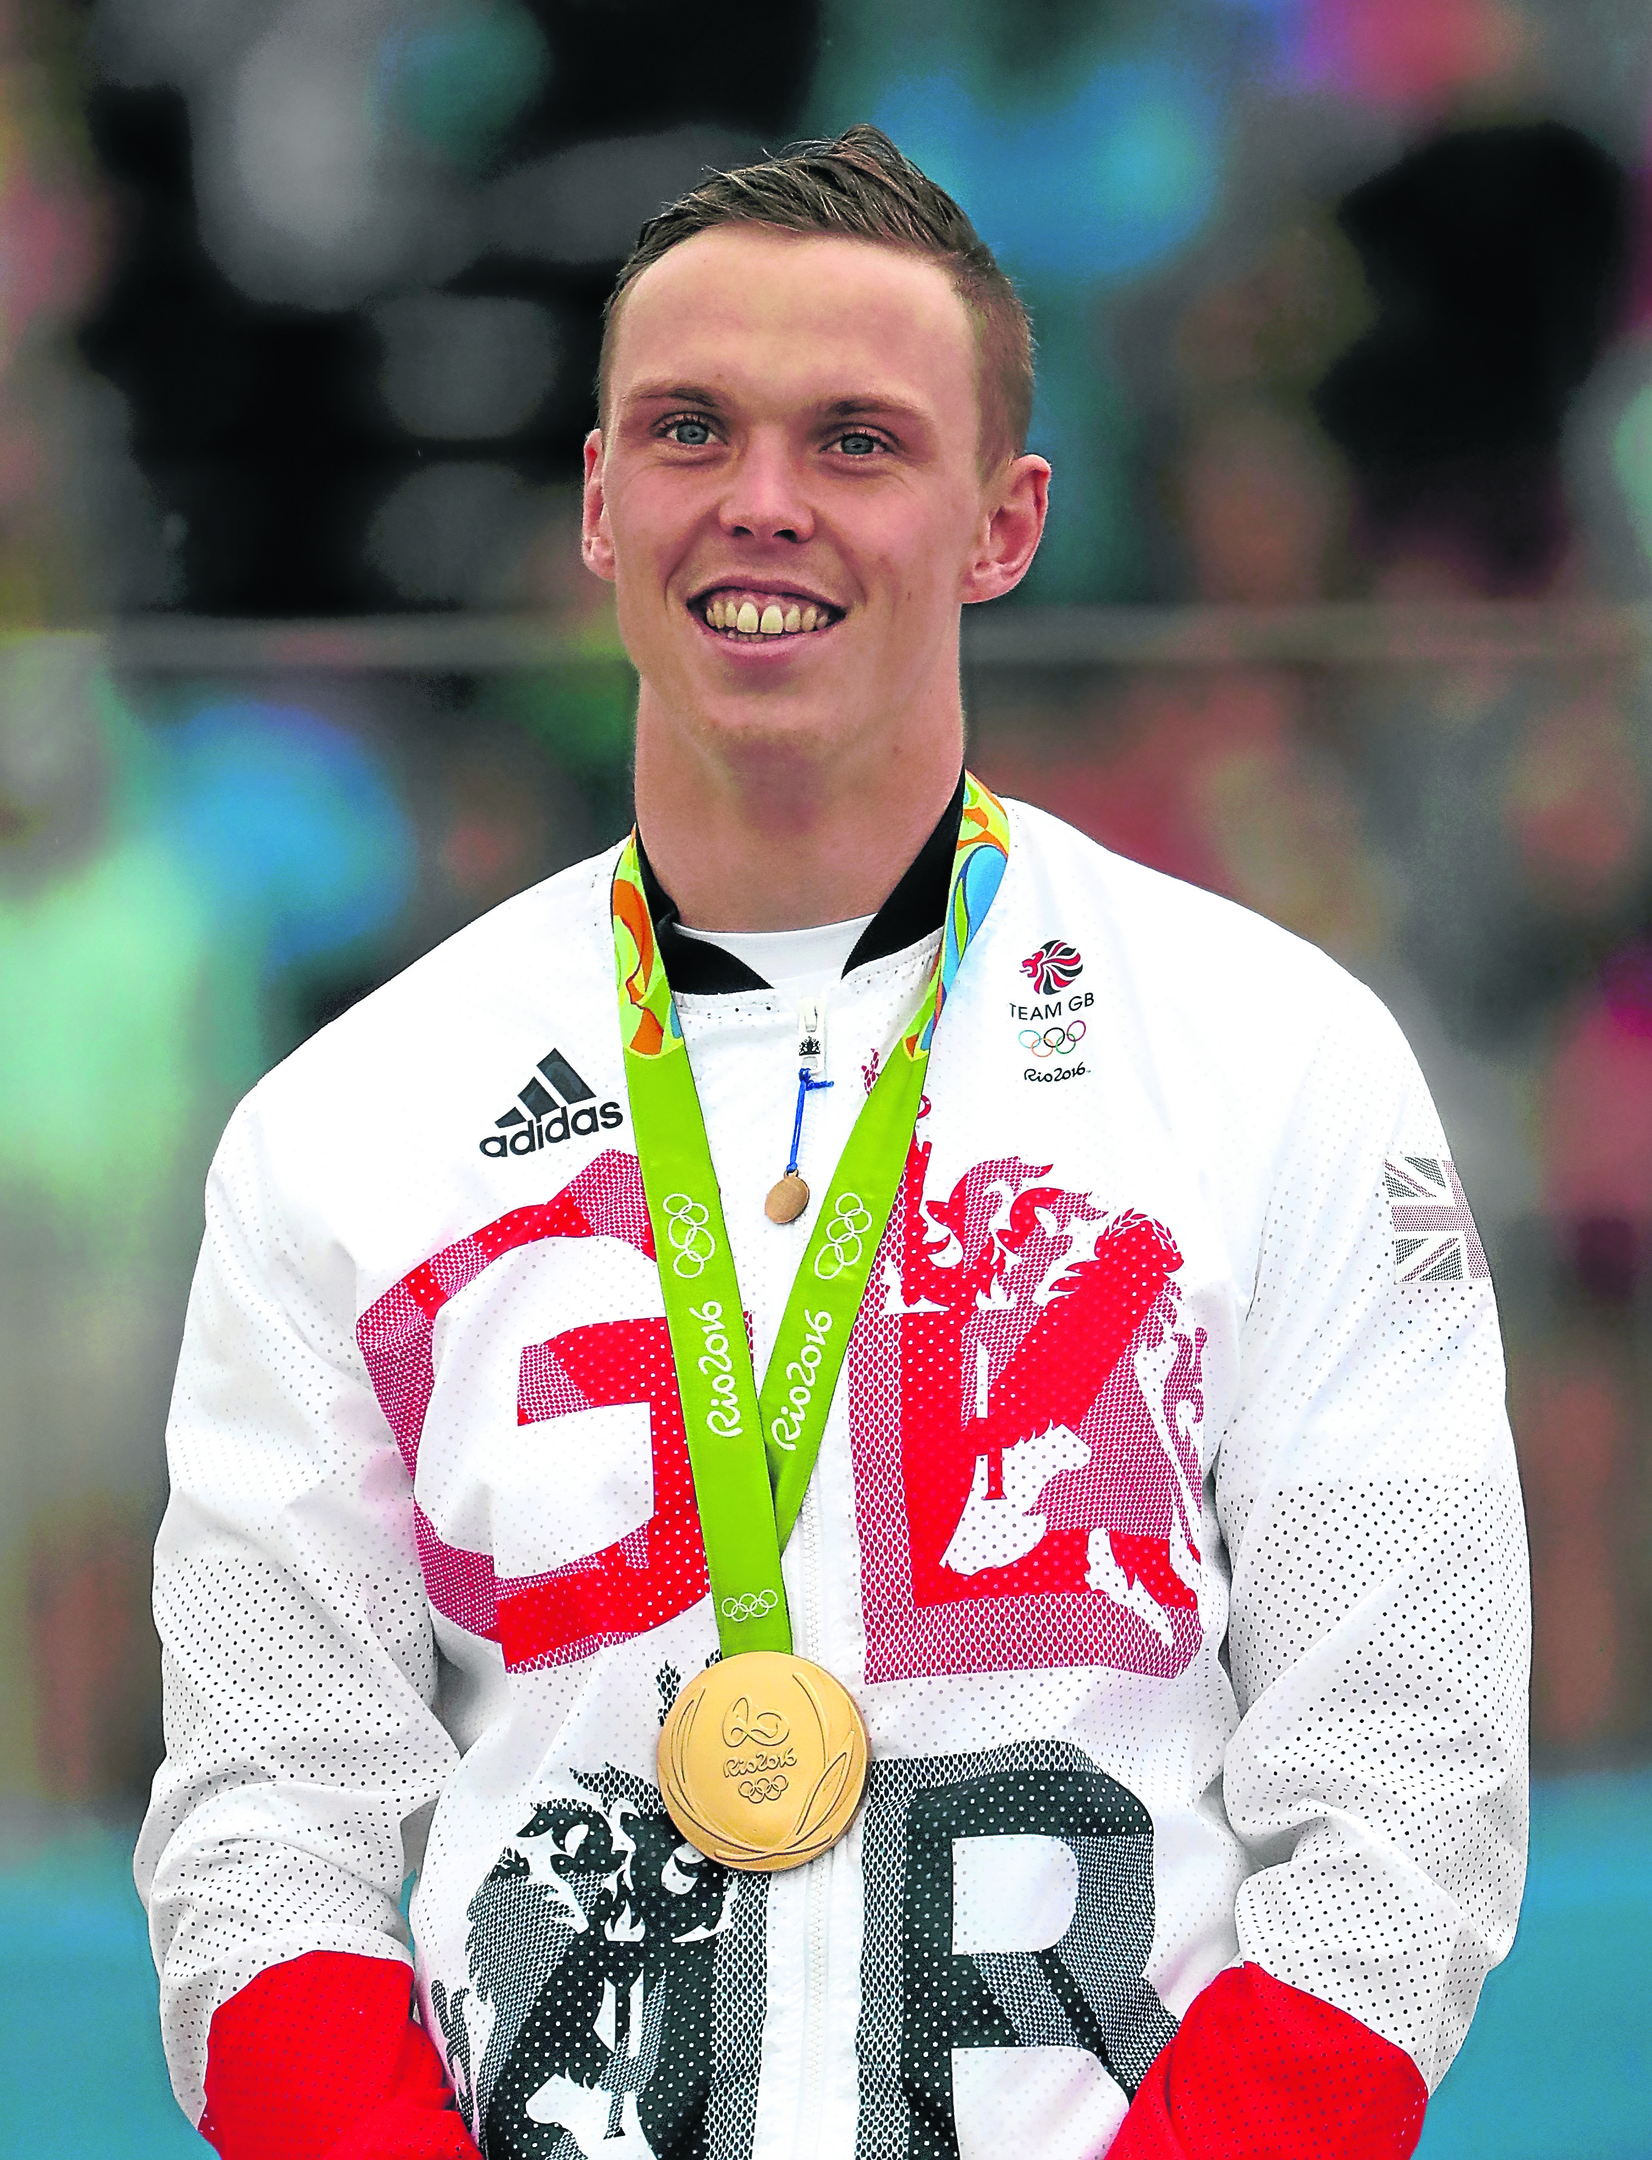 Gold medalist Joseph Clarke of Great Britain stands on the podium after the Kayak (K1) Men's Final (Photo by Christian Petersen/Getty Images)